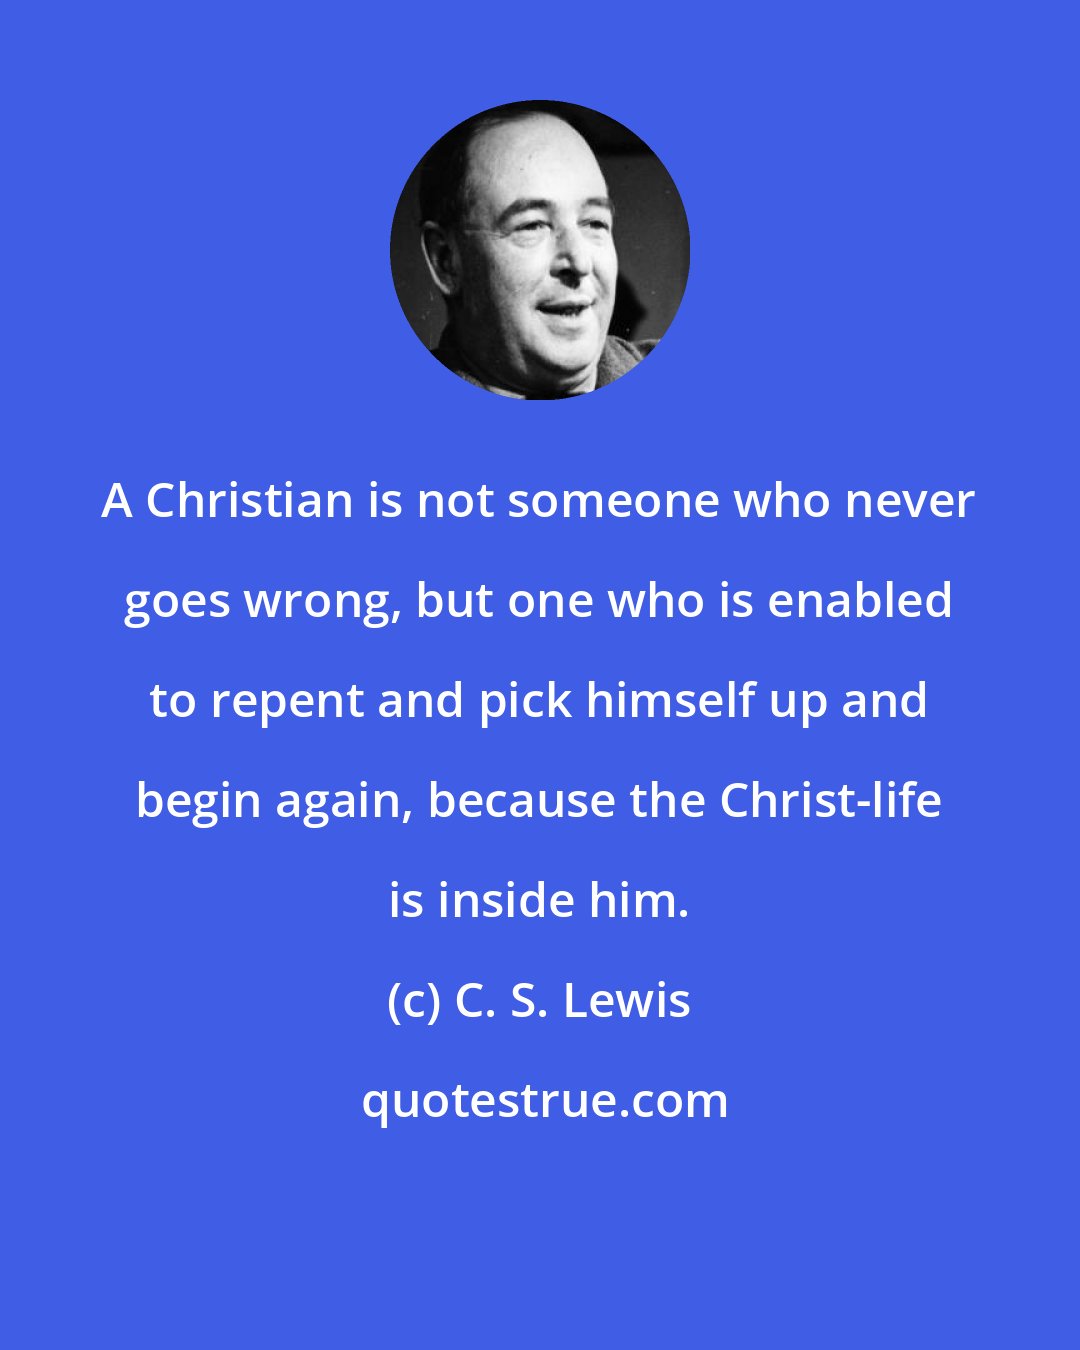 C. S. Lewis: A Christian is not someone who never goes wrong, but one who is enabled to repent and pick himself up and begin again, because the Christ-life is inside him.